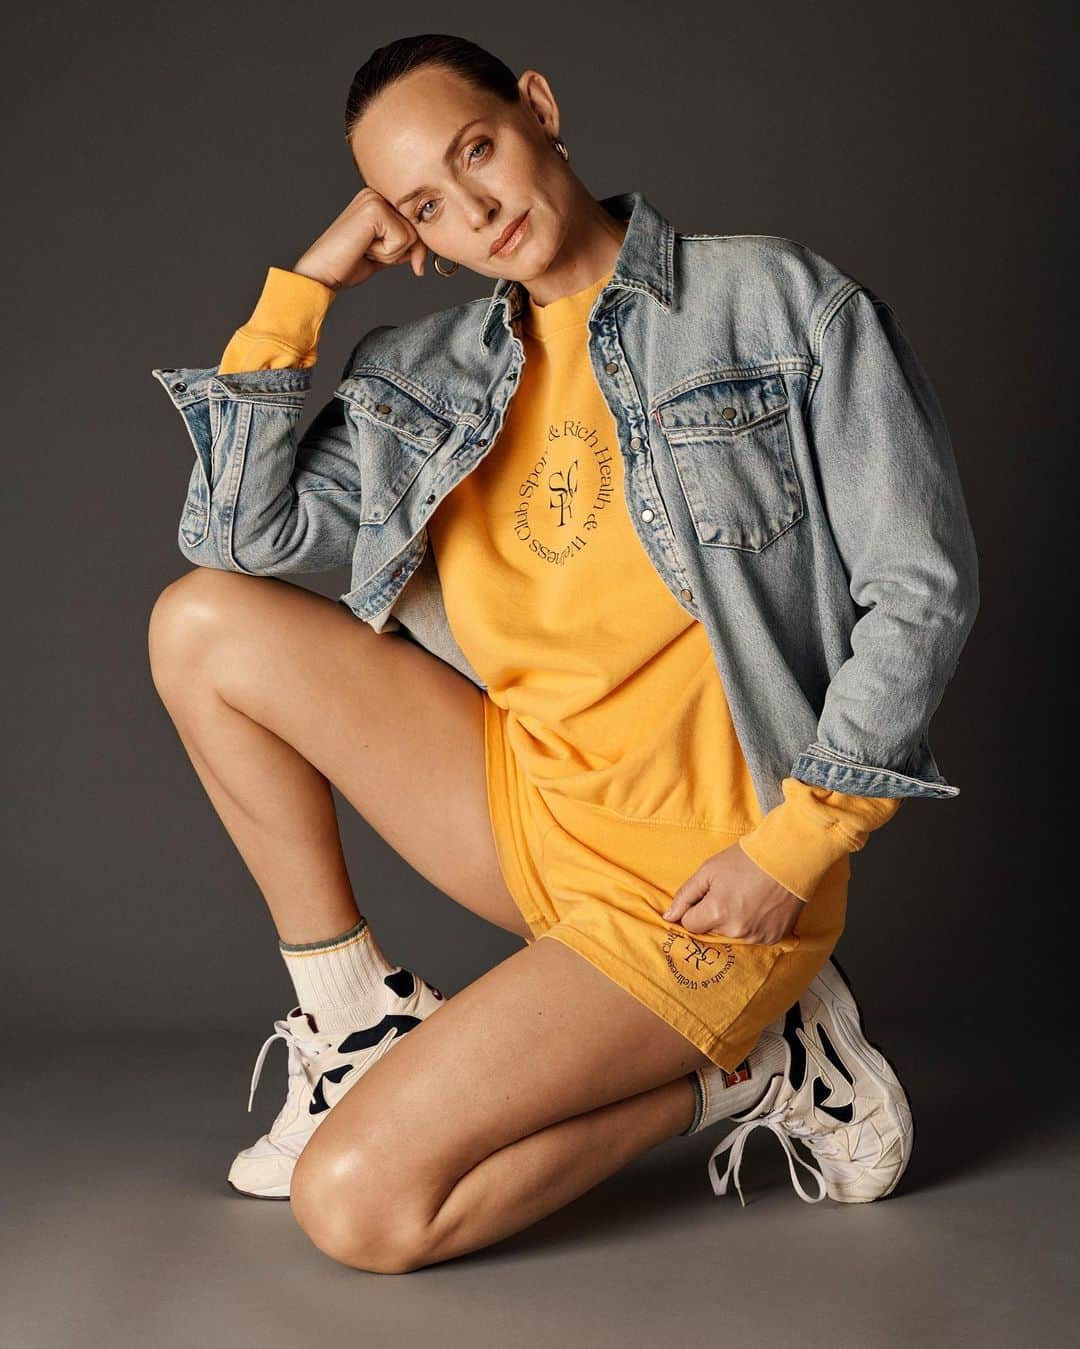 emilyのインスタグラム：「AMBER!!!!!!!!!!! @ambervalletta for @sportyandrich Spring Drop 1. Online 3/8.  SO incredibly excited to share these images!!! We love celebrating icons, and who better than Amber to represent an era of OG supermodels who defined 90s fashion and culture.   A portion of the proceeds from this drop will be donated to @surfrider who works to protect and restore our oceans. 🌍🌊💙  Photography @alexandranataf  Hair @teddycharles35  Assistants: @natgawd @aubdolores」